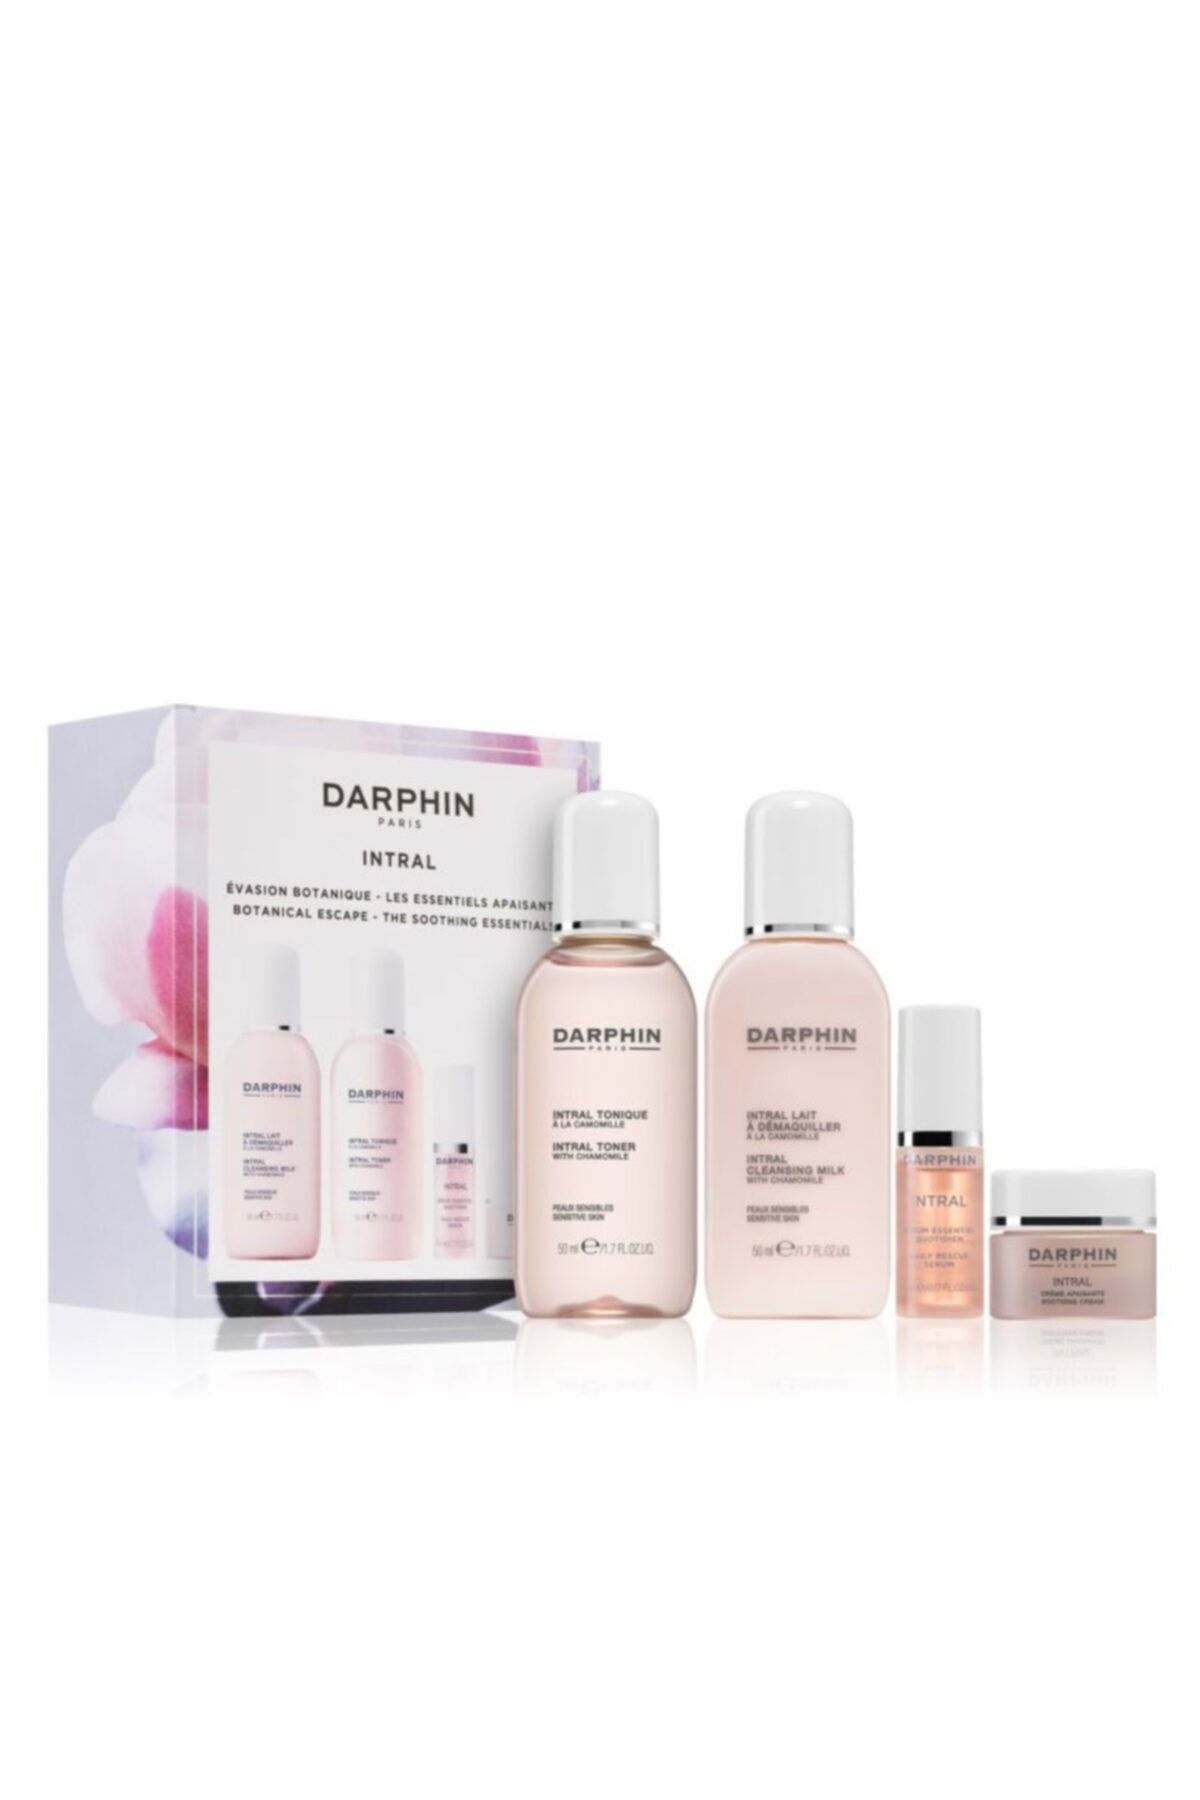 Darphin Intral Botanical Escape The Soothing Essentials Set